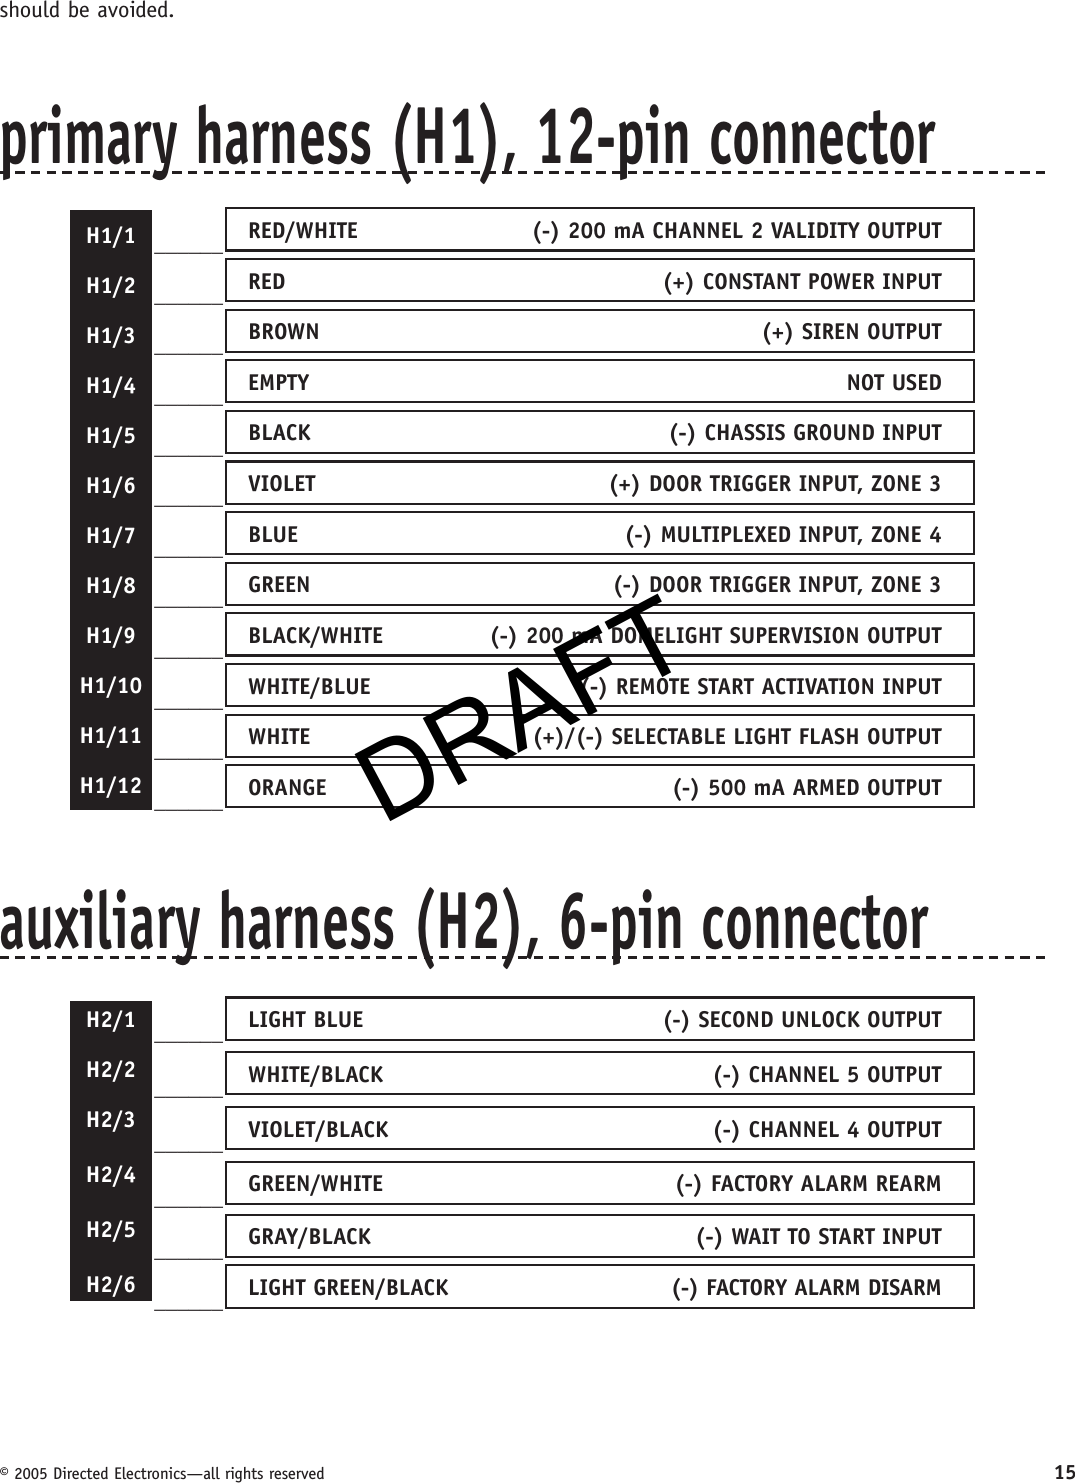 DRAFT© 2005 Directed Electronics—all rights reserved 15should be avoided.primary harness (H1), 12-pin connectorH1/1H1/2H1/3H1/4H1/5H1/6H1/7H1/8H1/9H1/10H1/11H1/12______ RED/WHITE  (-) 200 mA CHANNEL 2 VALIDITY OUTPUT ______ RED  (+) CONSTANT POWER INPUT ______ BROWN  (+) SIREN OUTPUT  ______ EMPTY NOT USED ______ BLACK   (-) CHASSIS GROUND INPUT  ______ VIOLET   (+) DOOR TRIGGER INPUT, ZONE 3   ______ BLUE  (-) MULTIPLEXED INPUT, ZONE 4  ______ GREEN  (-) DOOR TRIGGER INPUT, ZONE 3   ______ BLACK/WHITE  (-) 200 mA DOMELIGHT SUPERVISION OUTPUT    ______ WHITE/BLUE  (-) REMOTE START ACTIVATION INPUT ______ WHITE  (+)/(-) SELECTABLE LIGHT FLASH OUTPUT ______ ORANGE  (-) 500 mA ARMED OUTPUT auxiliary harness (H2), 6-pin connectorH2/1H2/2H2/3H2/4H2/5H2/6______ LIGHT BLUE  (-) SECOND UNLOCK OUTPUT ______ WHITE/BLACK  (-) CHANNEL 5 OUTPUT ______ VIOLET/BLACK  (-) CHANNEL 4 OUTPUT ______ GREEN/WHITE  (-) FACTORY ALARM REARM ______ GRAY/BLACK  (-) WAIT TO START INPUT ______ LIGHT GREEN/BLACK  (-) FACTORY ALARM DISARMDRAFT